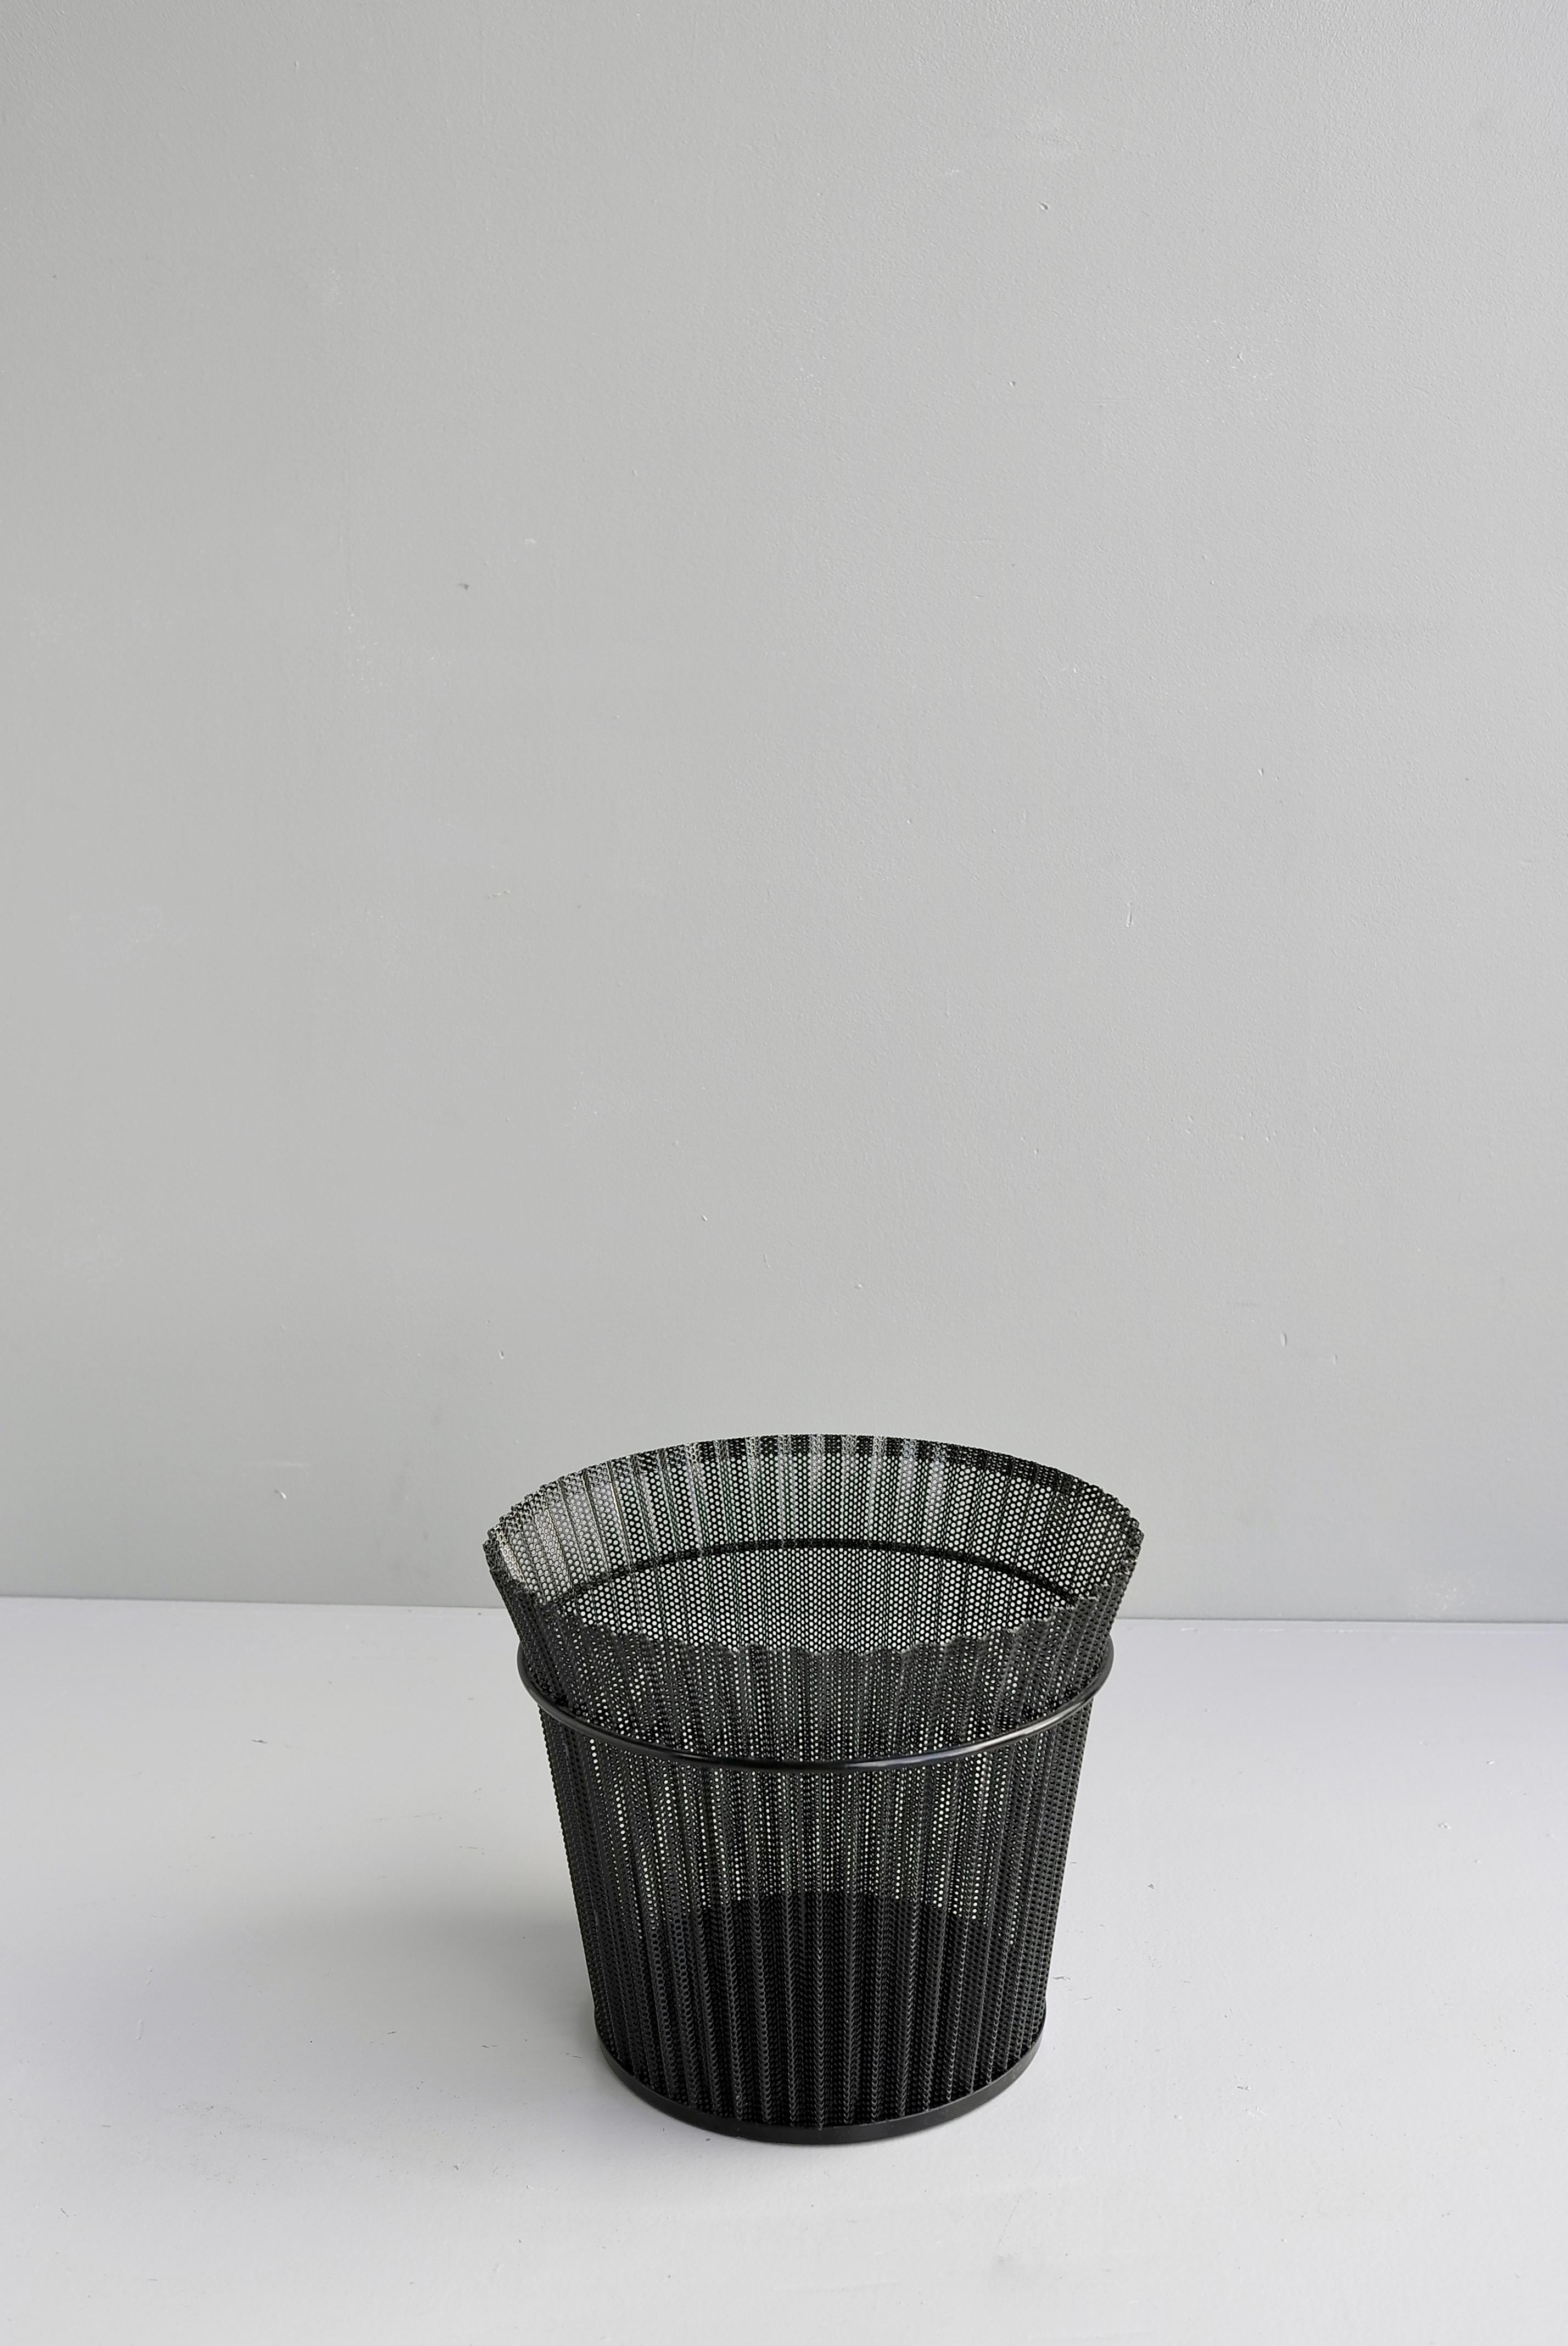 Large Mathieu Matégot Black Metal Wastepaper Basket, First Edition, 1950s In Good Condition For Sale In Den Haag, NL